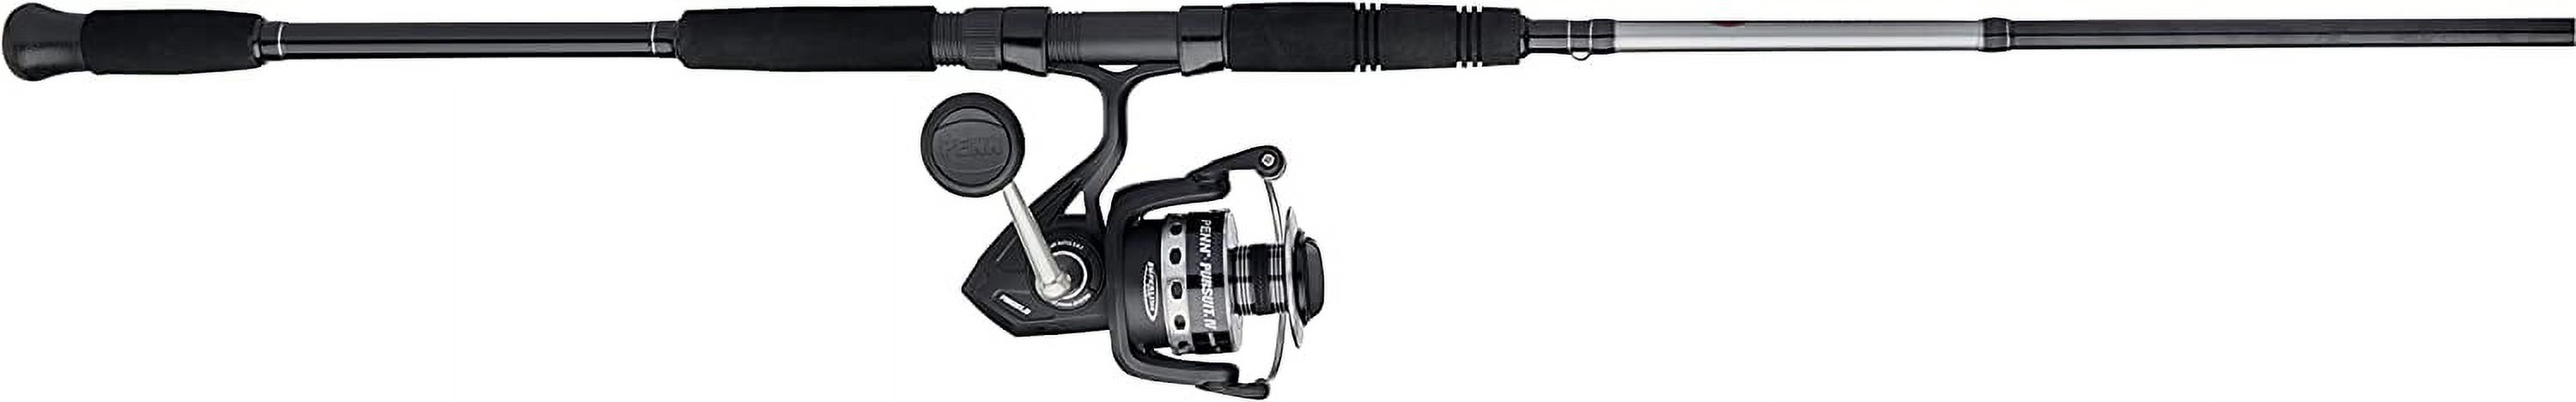 PENN 7' Pursuit IV Fishing Rod and Reel Inshore Spinning Combo - image 5 of 6